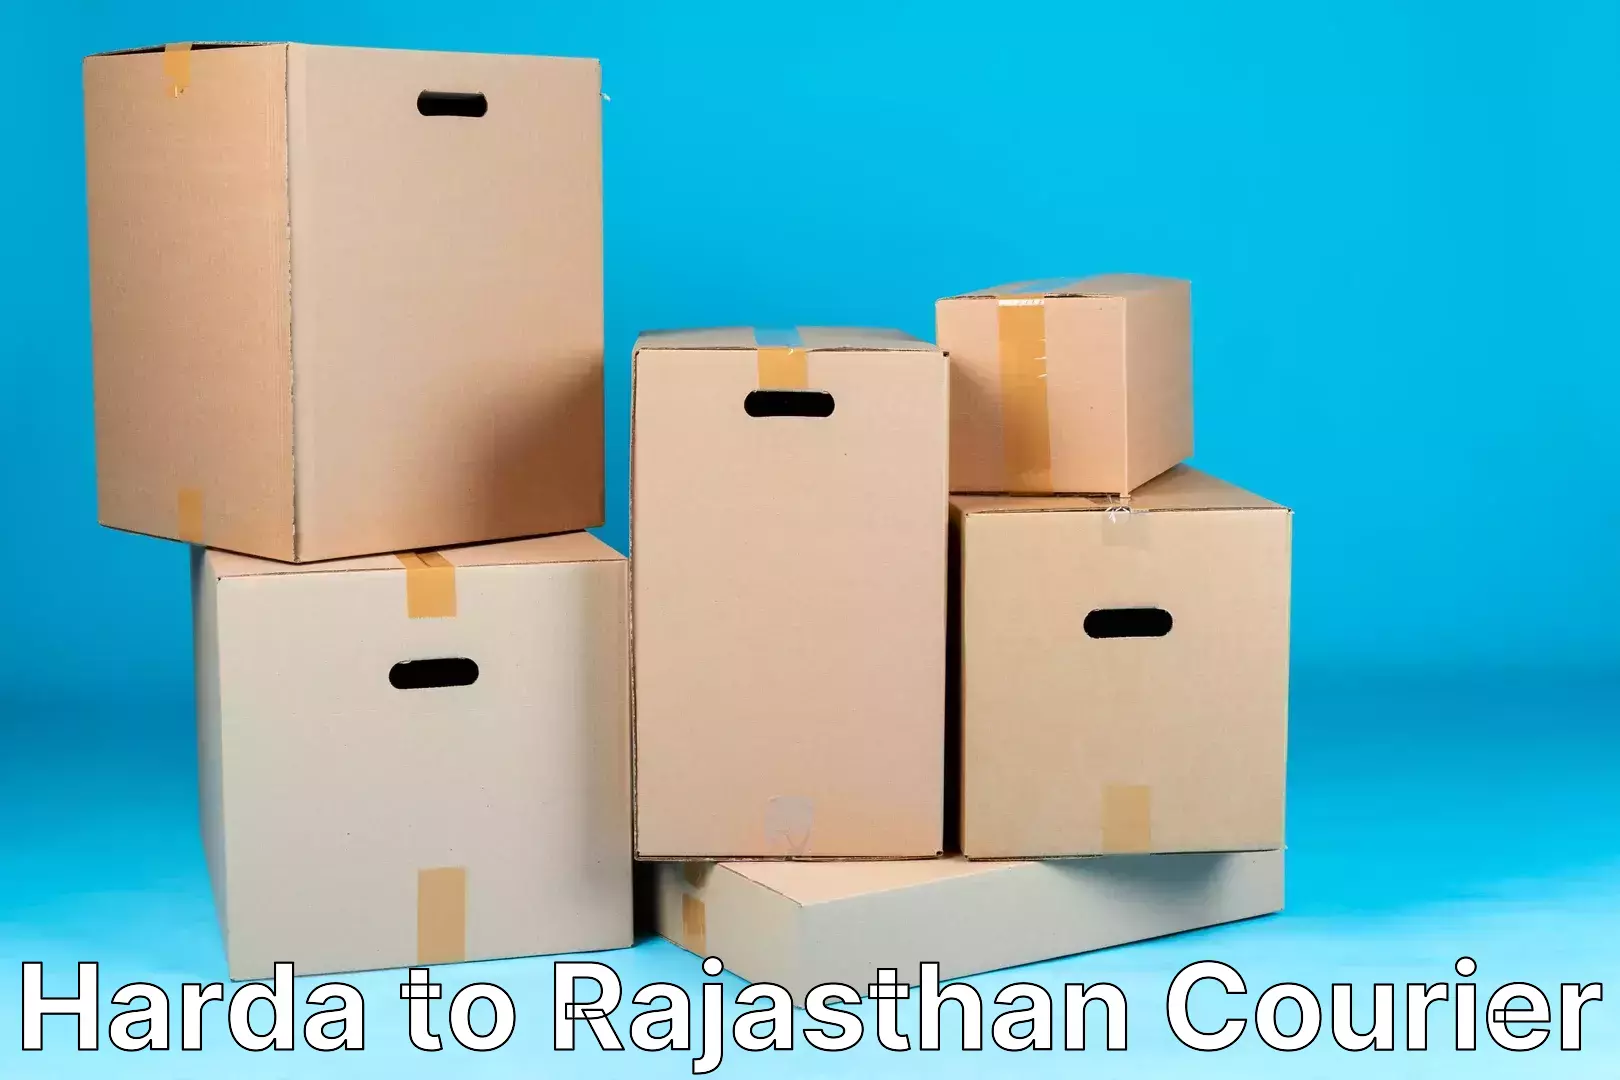 High-capacity courier solutions Harda to Rajasthan